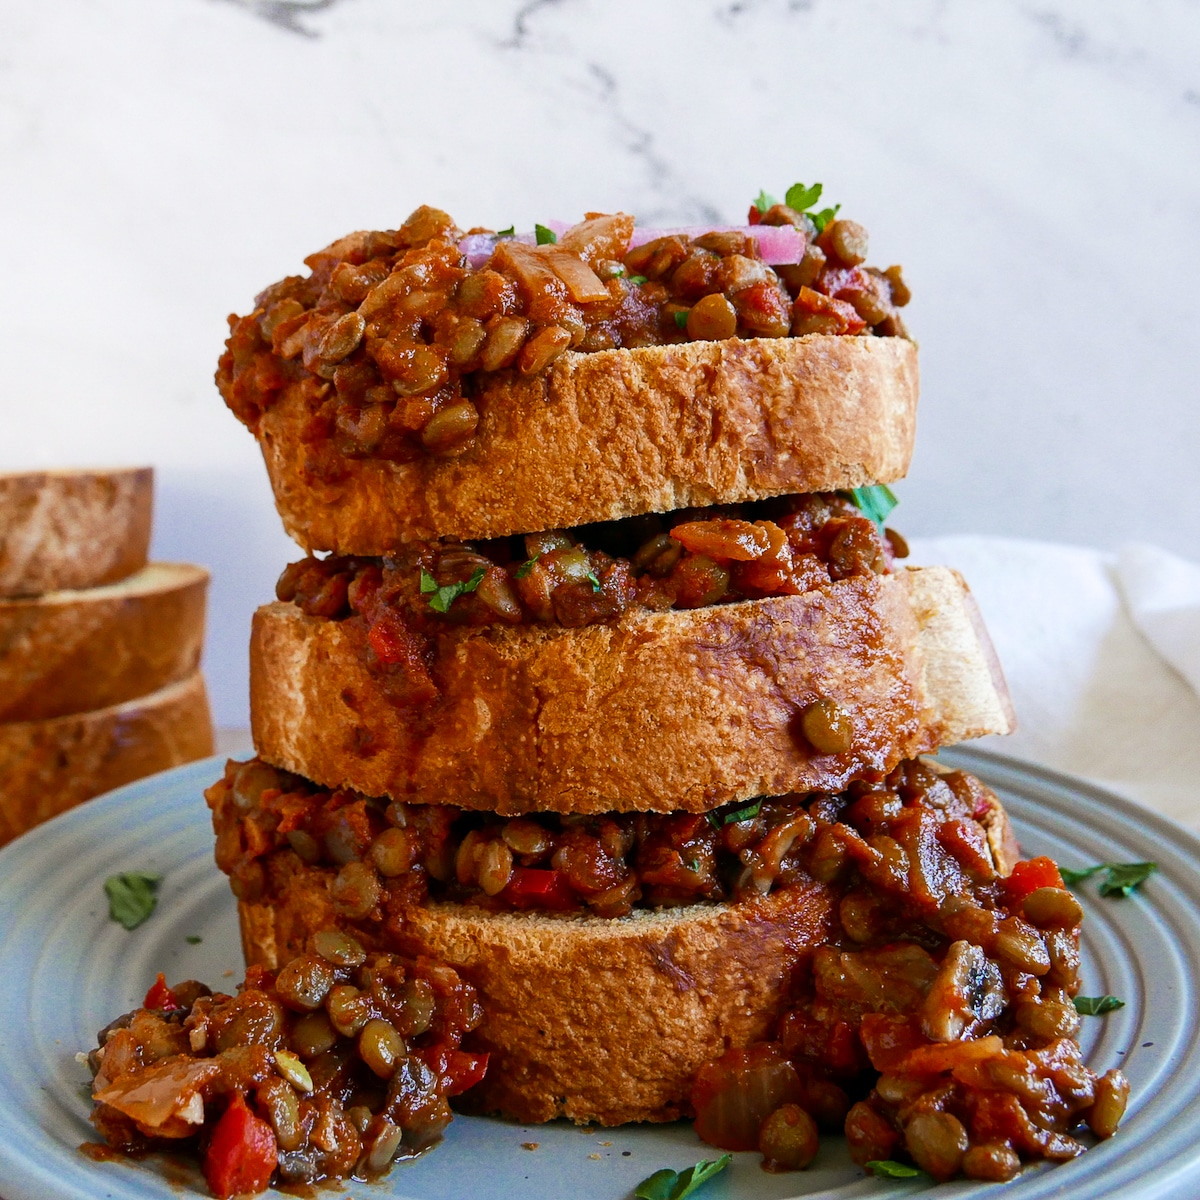 stack of vegetarian sloppy joes on a blue plate.